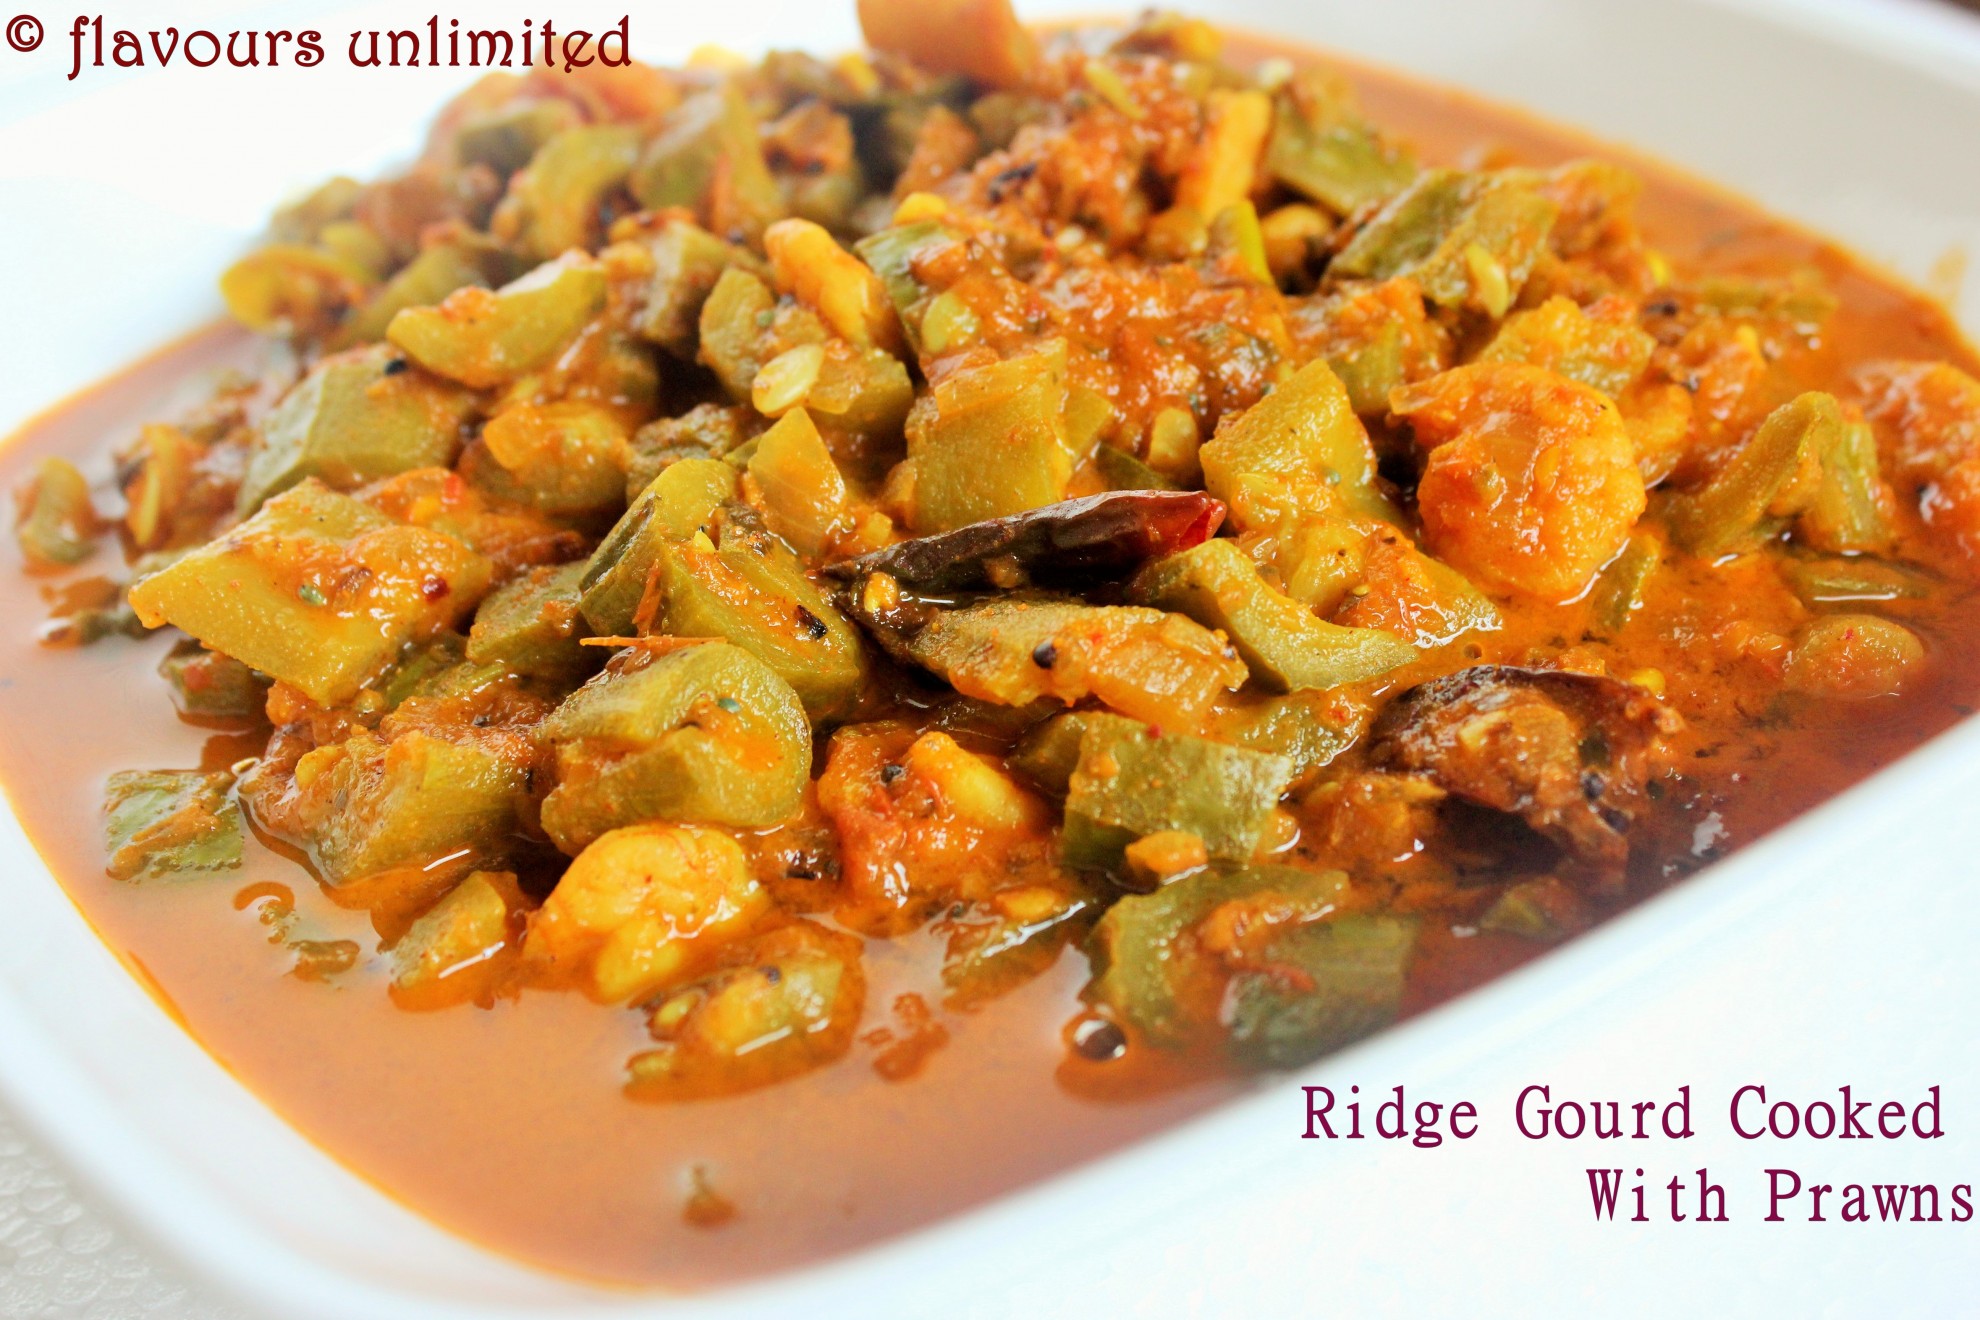 Ridge Gourd Cooked With Prawns 